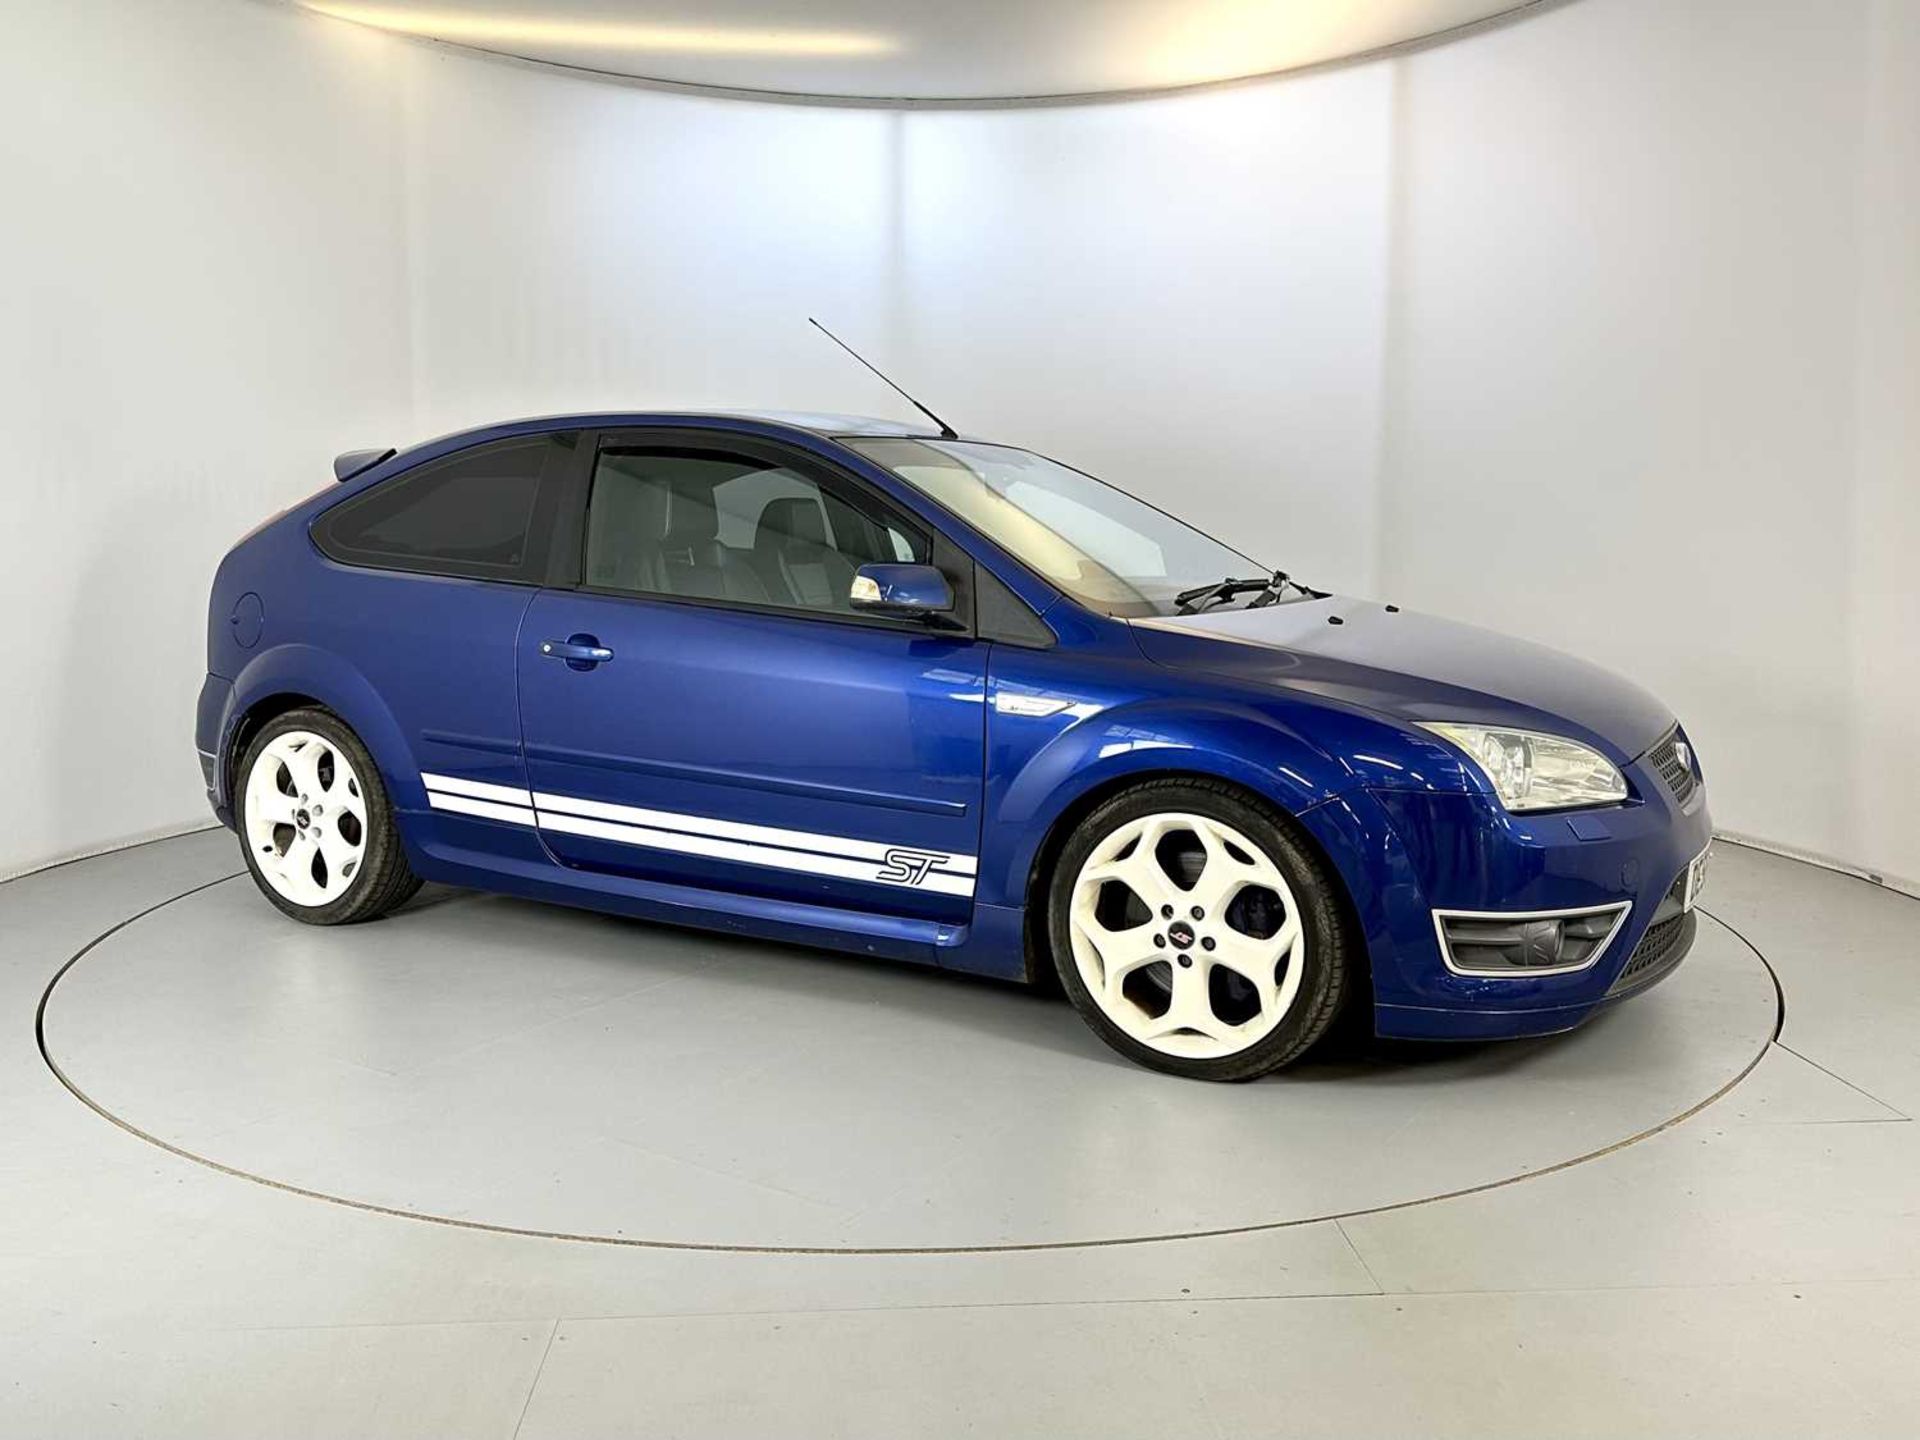 2006 Ford Focus ST - Image 12 of 28